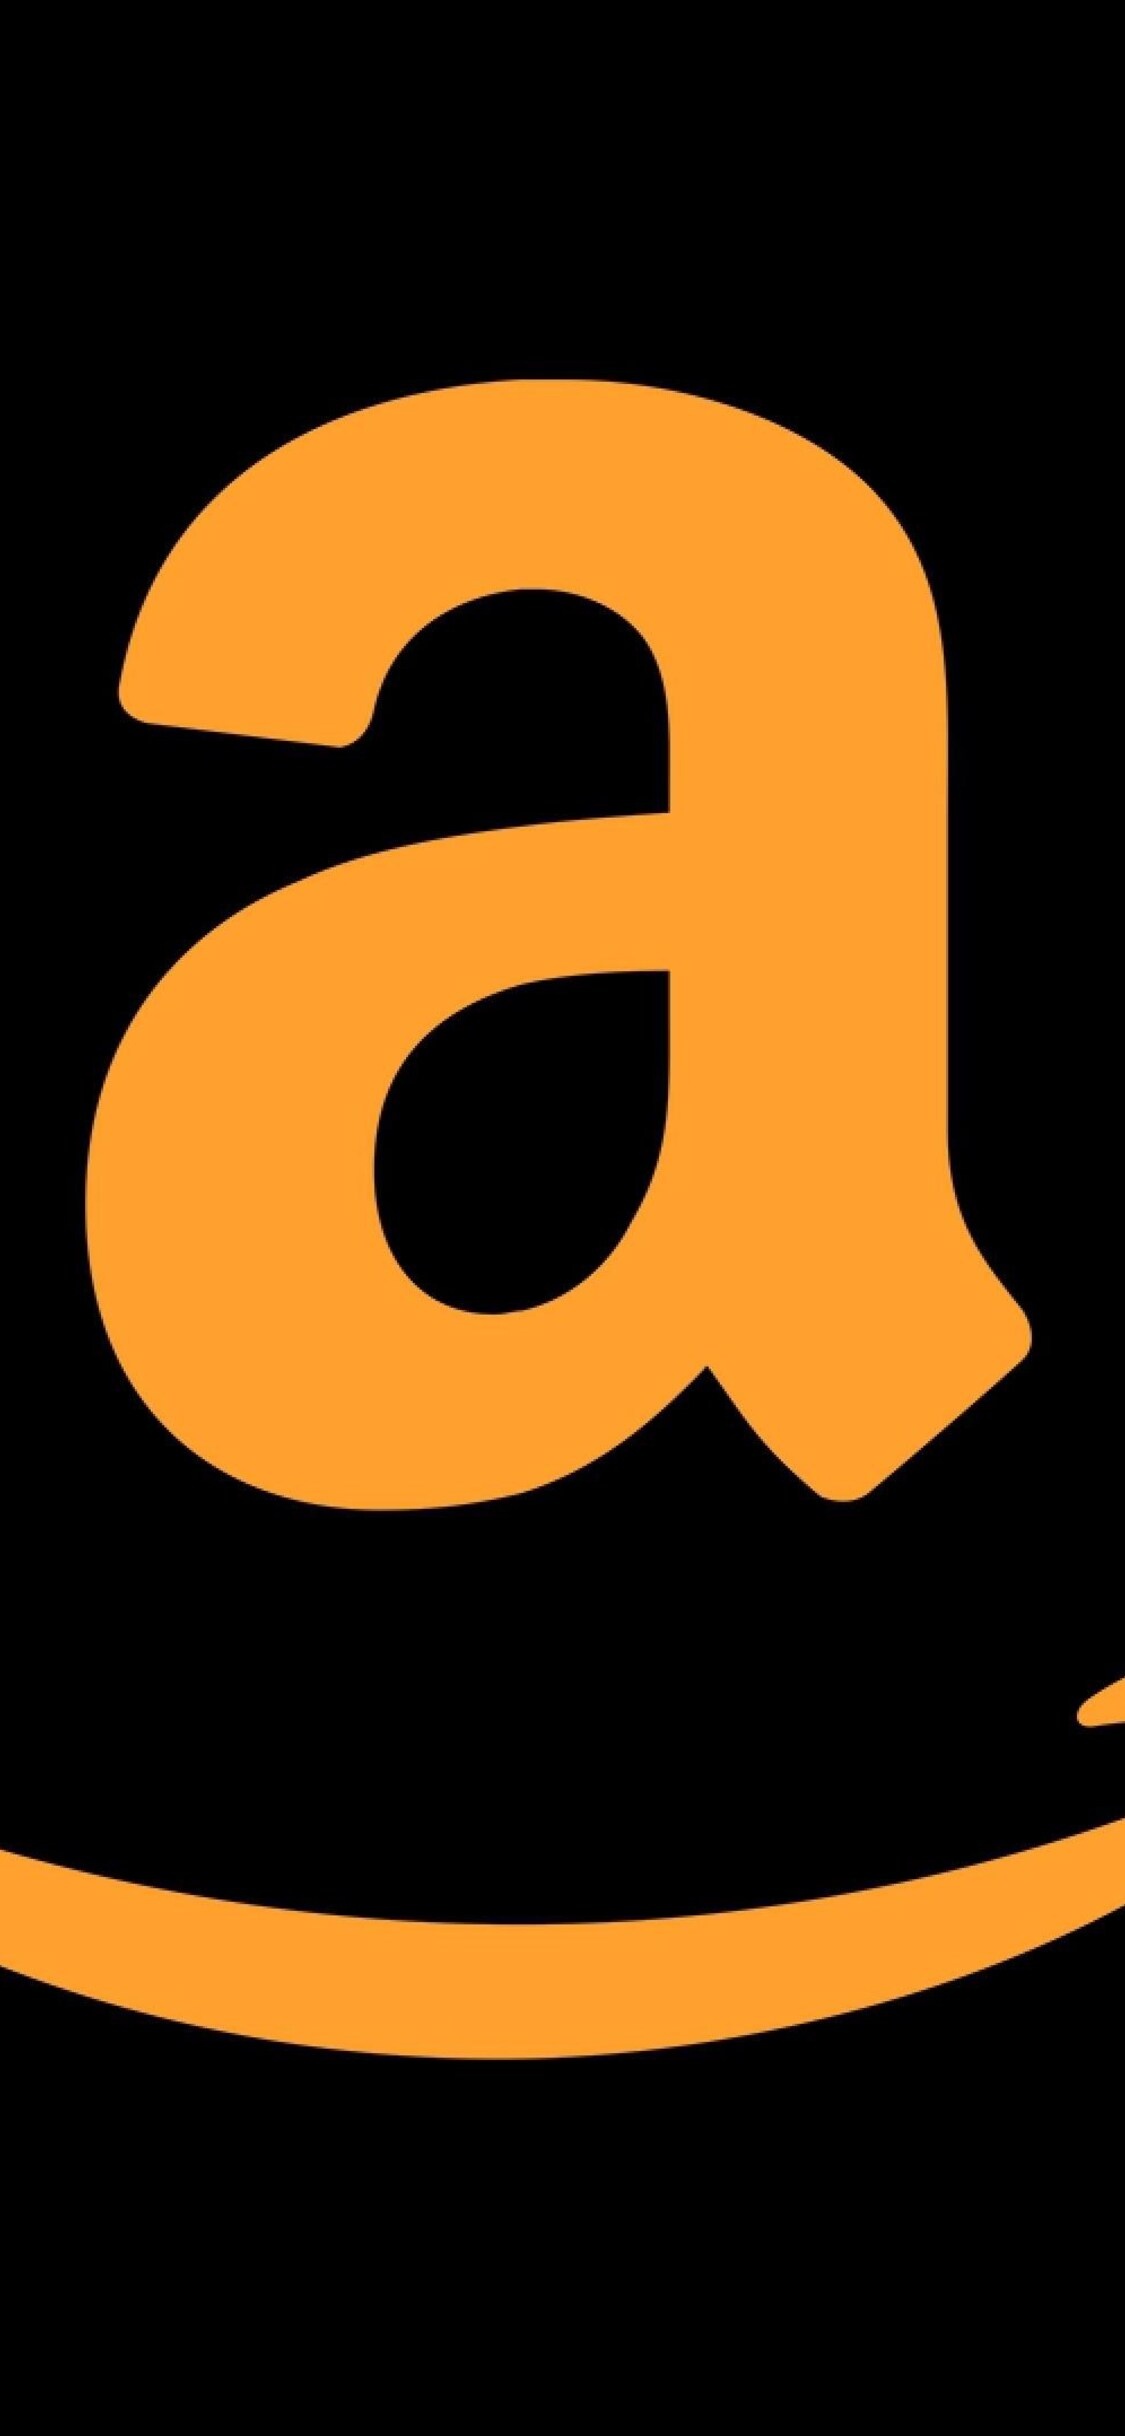 Amazon: The second-largest private employer in the United States, Logo, Letter “a”. 1130x2440 HD Background.